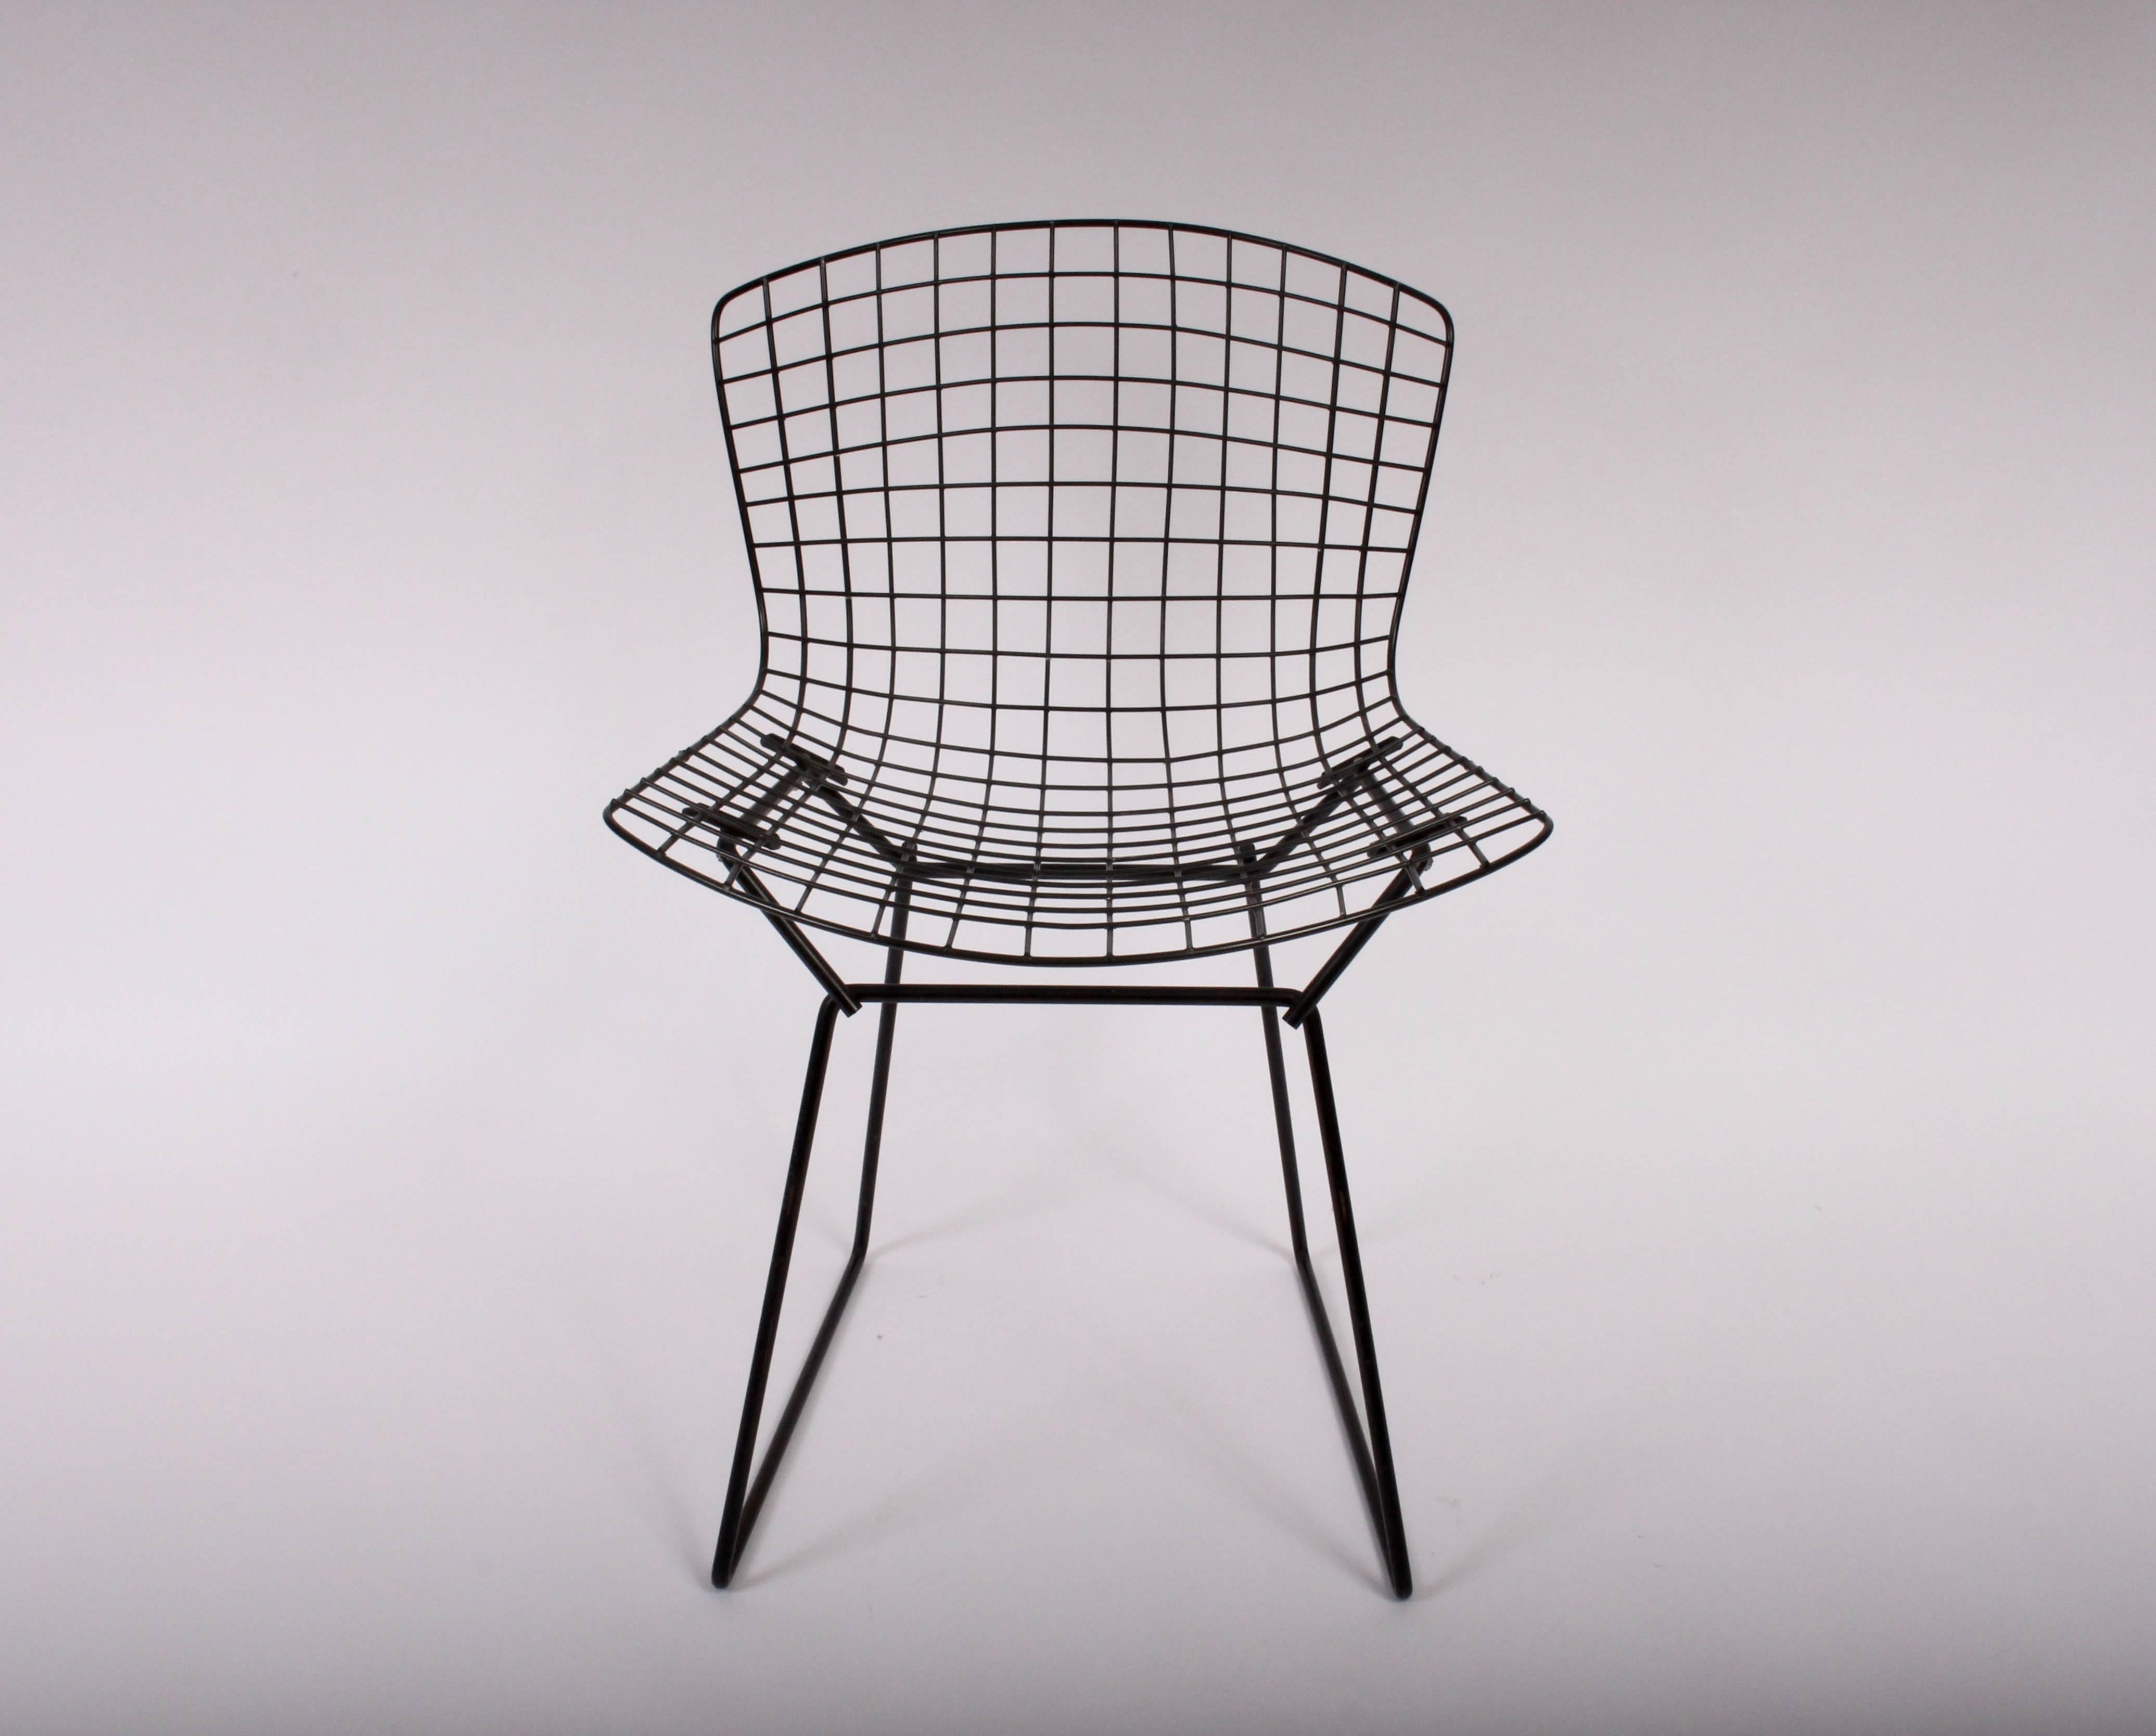 1960s Harry Bertoia for Knoll Set of Twelve Indoor Outdoor Black Wire Side Chairs. Enameled Black wire. Complete with two piece Black vinyl seat and back cushions. Most vinyl covers have Knoll tag. Foam needs replacement. Original paint. Saw indoor